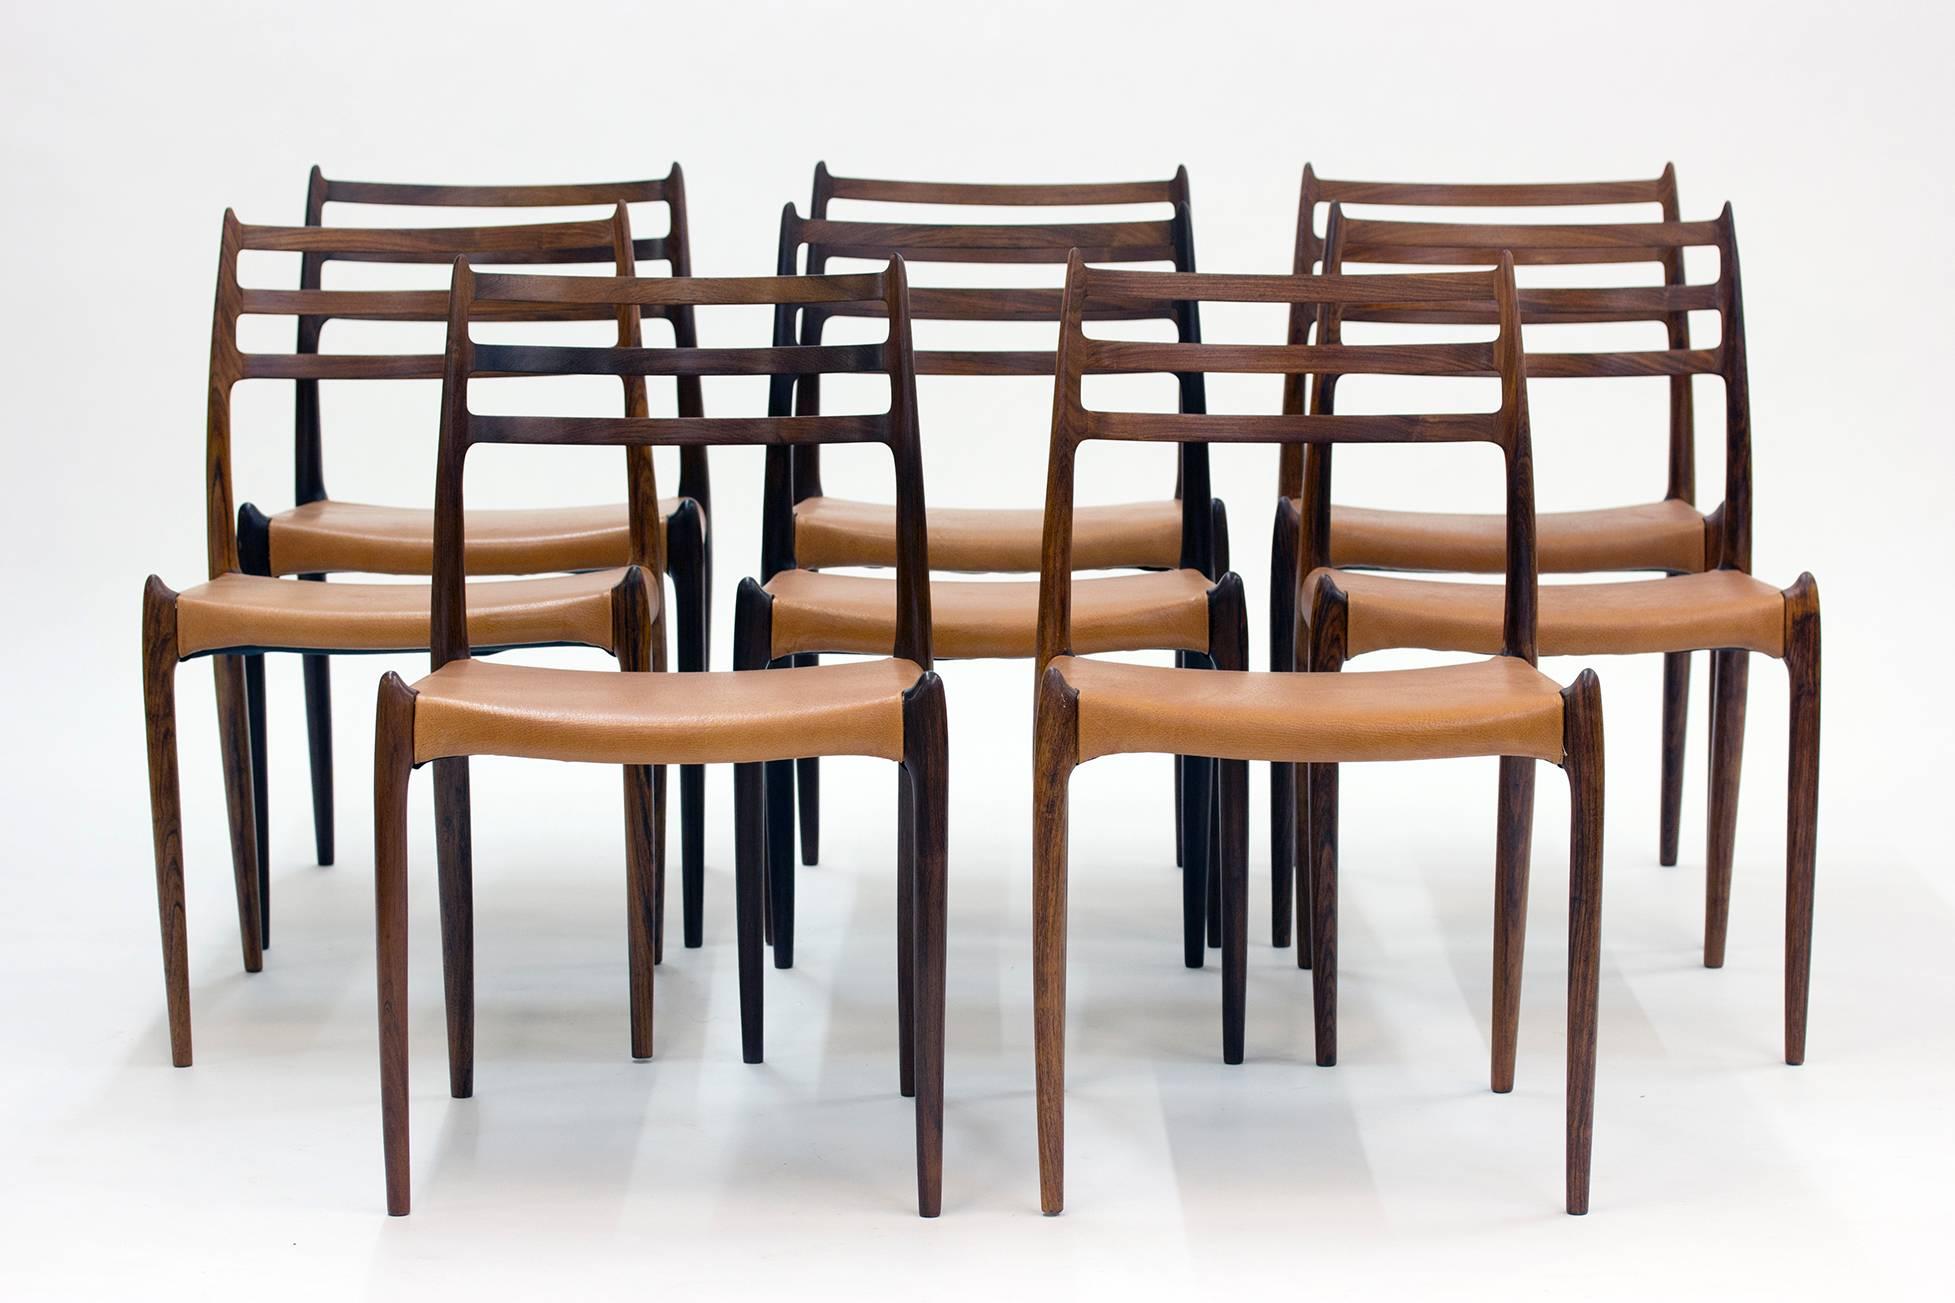 Set of eight gorgeous rosewood dining chairs by Niels O. Møller. Model 78 designed in 1962.  Vintage leather seats in a tan nuance. The fluency of the design and the hornlike details at the seats and on the backrests give these chairs a breathtaking